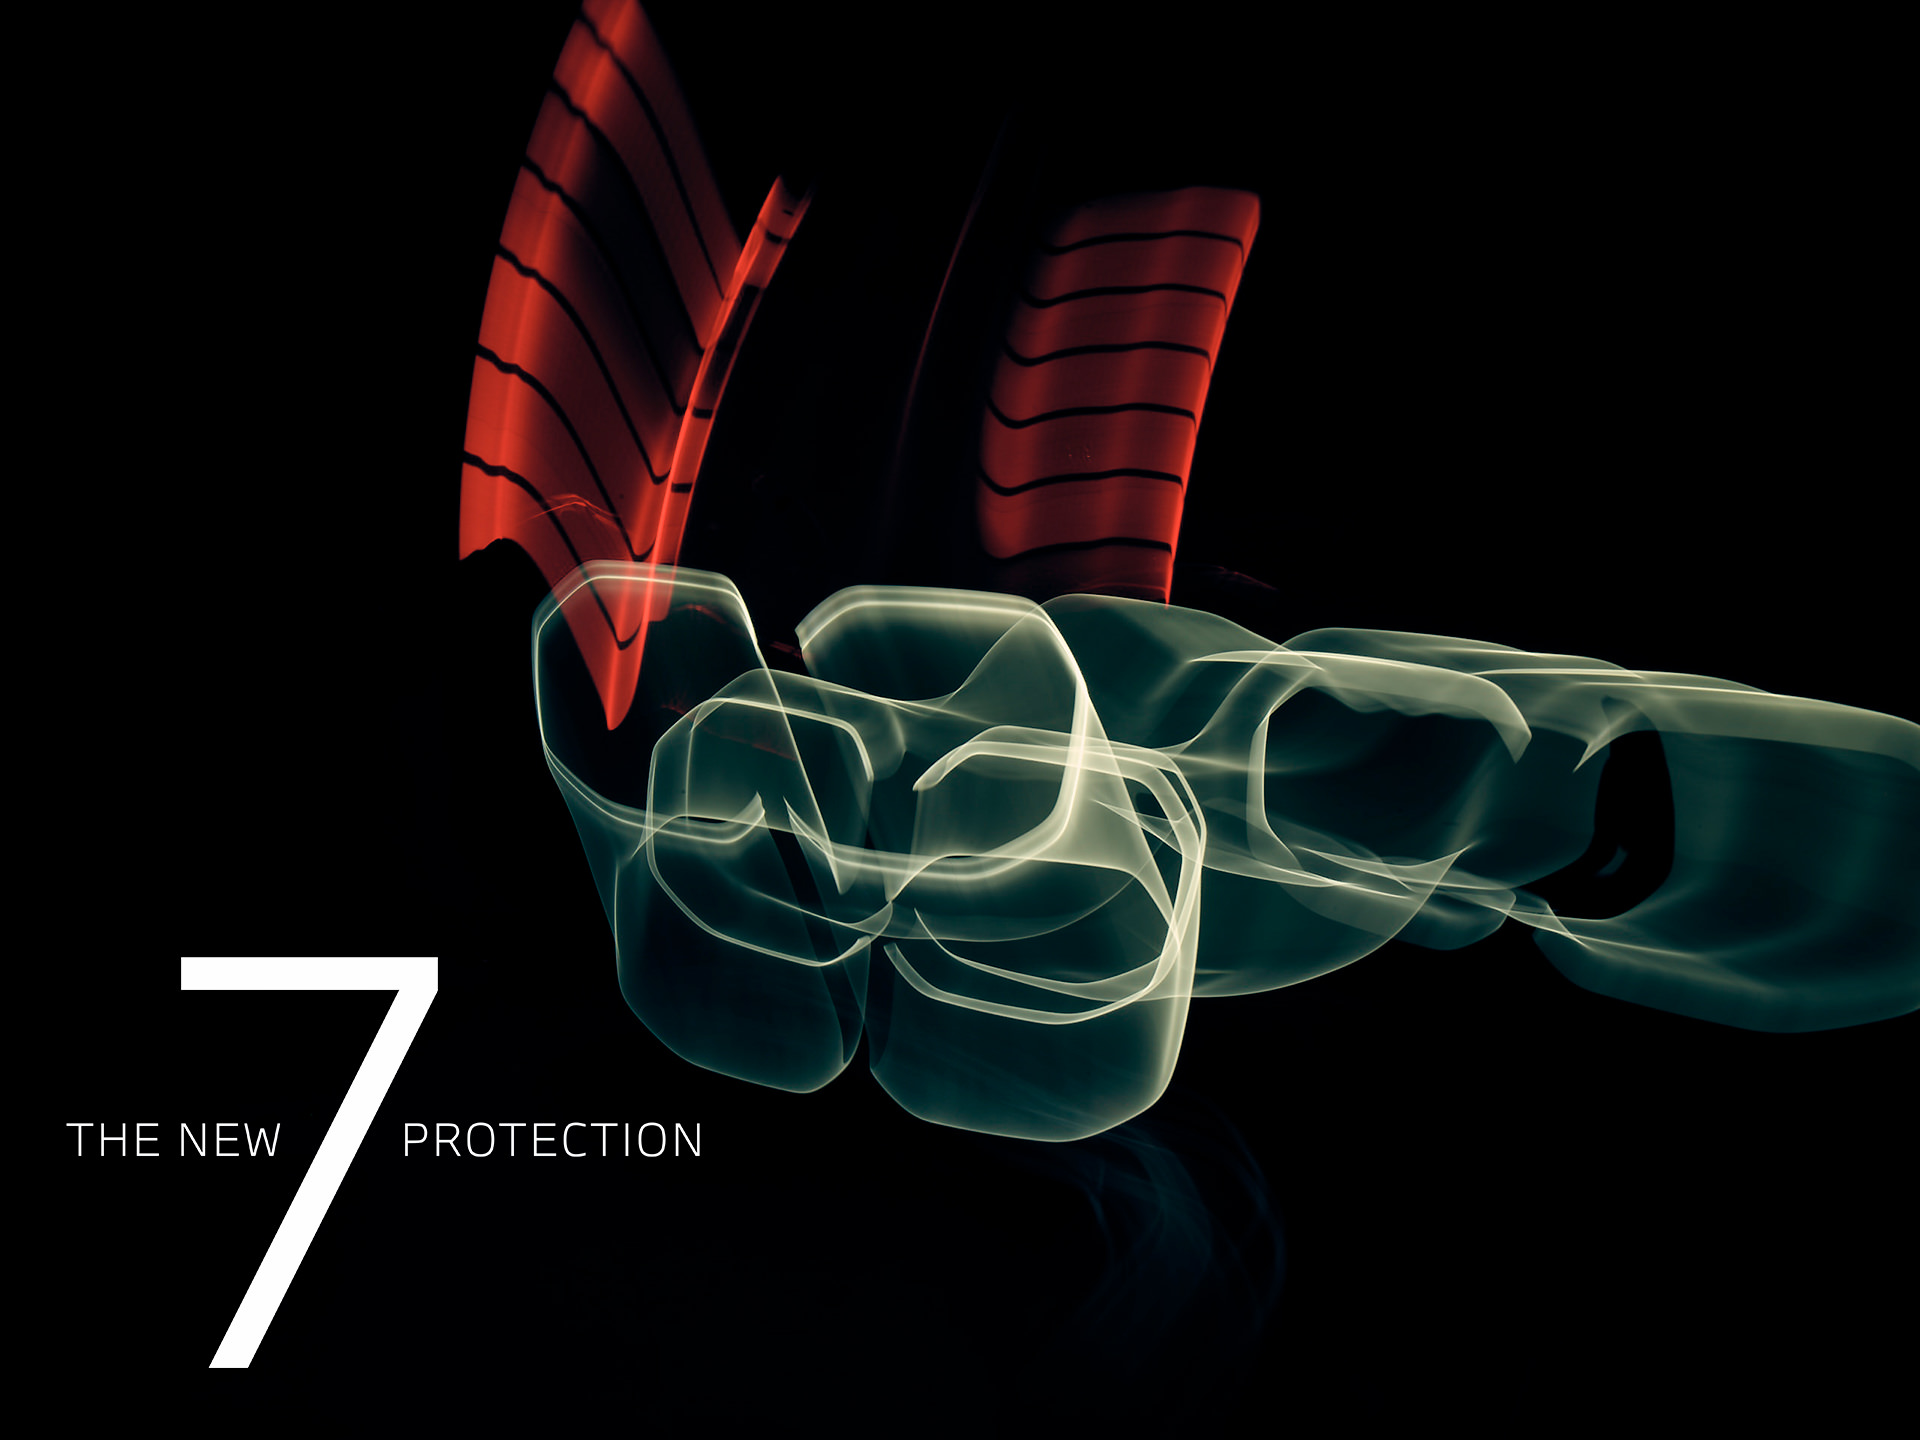 BWM G73 THE NEW 7 PROTECTION